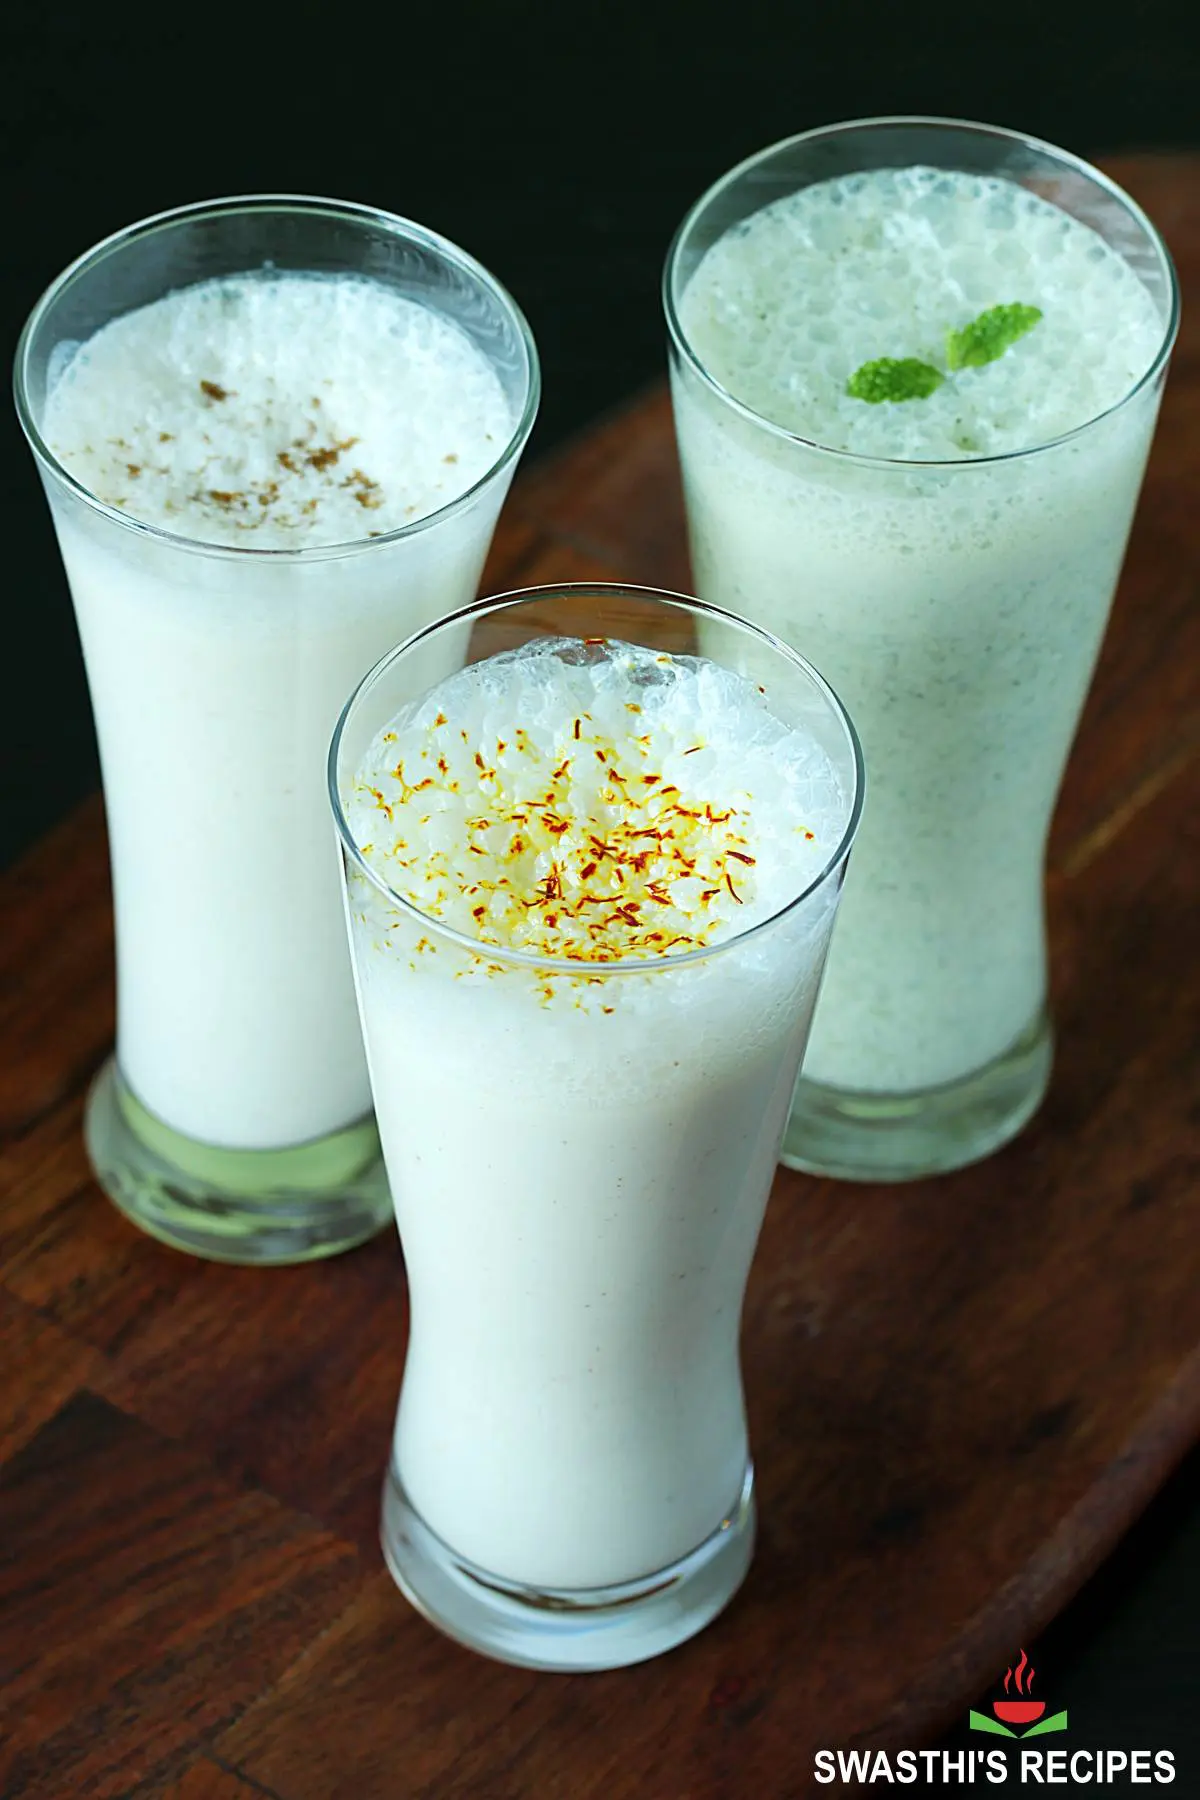 Lassi: The drink, not the dog - KASA Indian Eatery